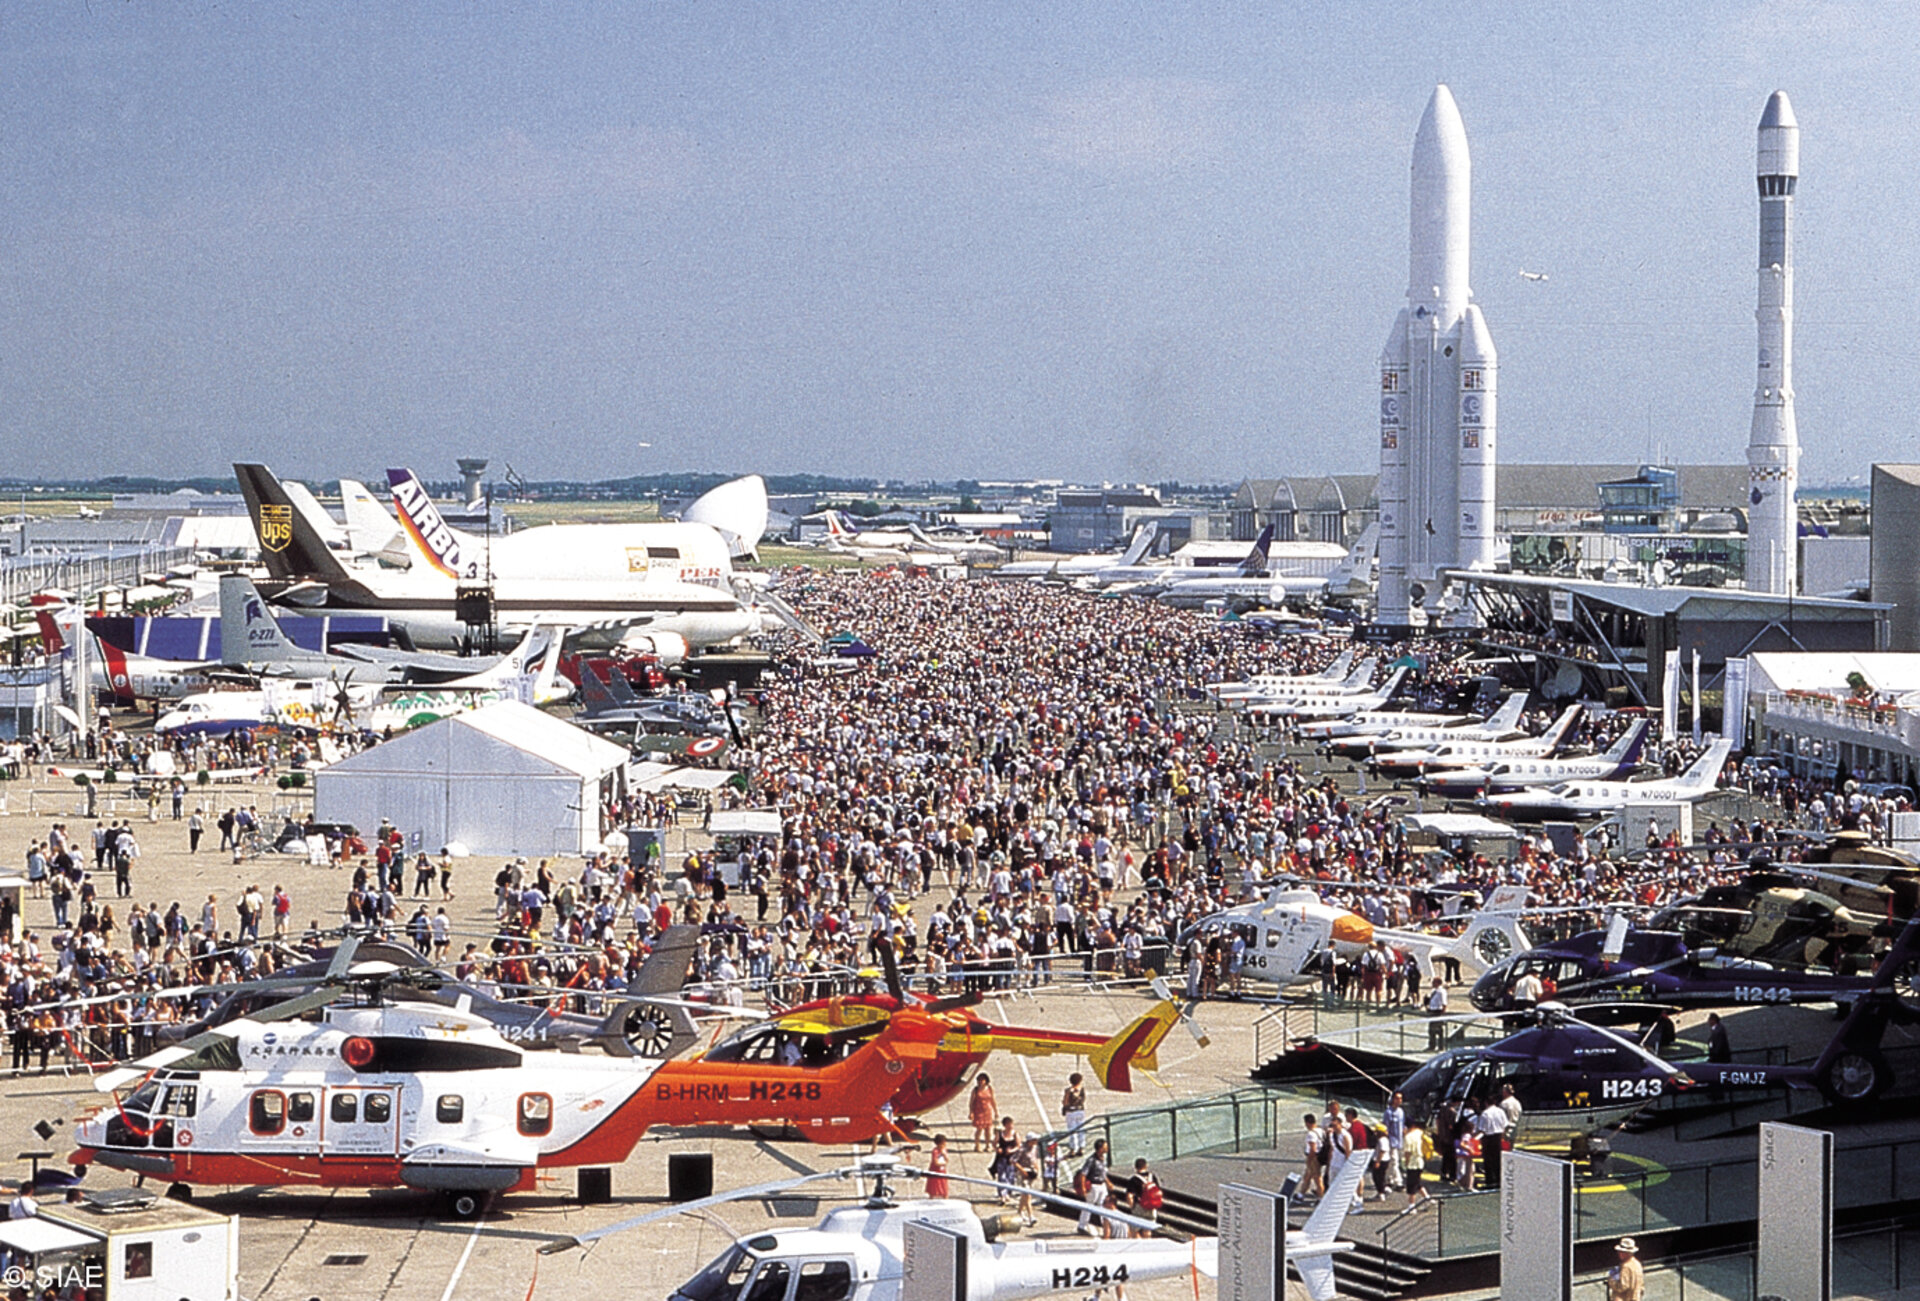 Le Bourget Air Show